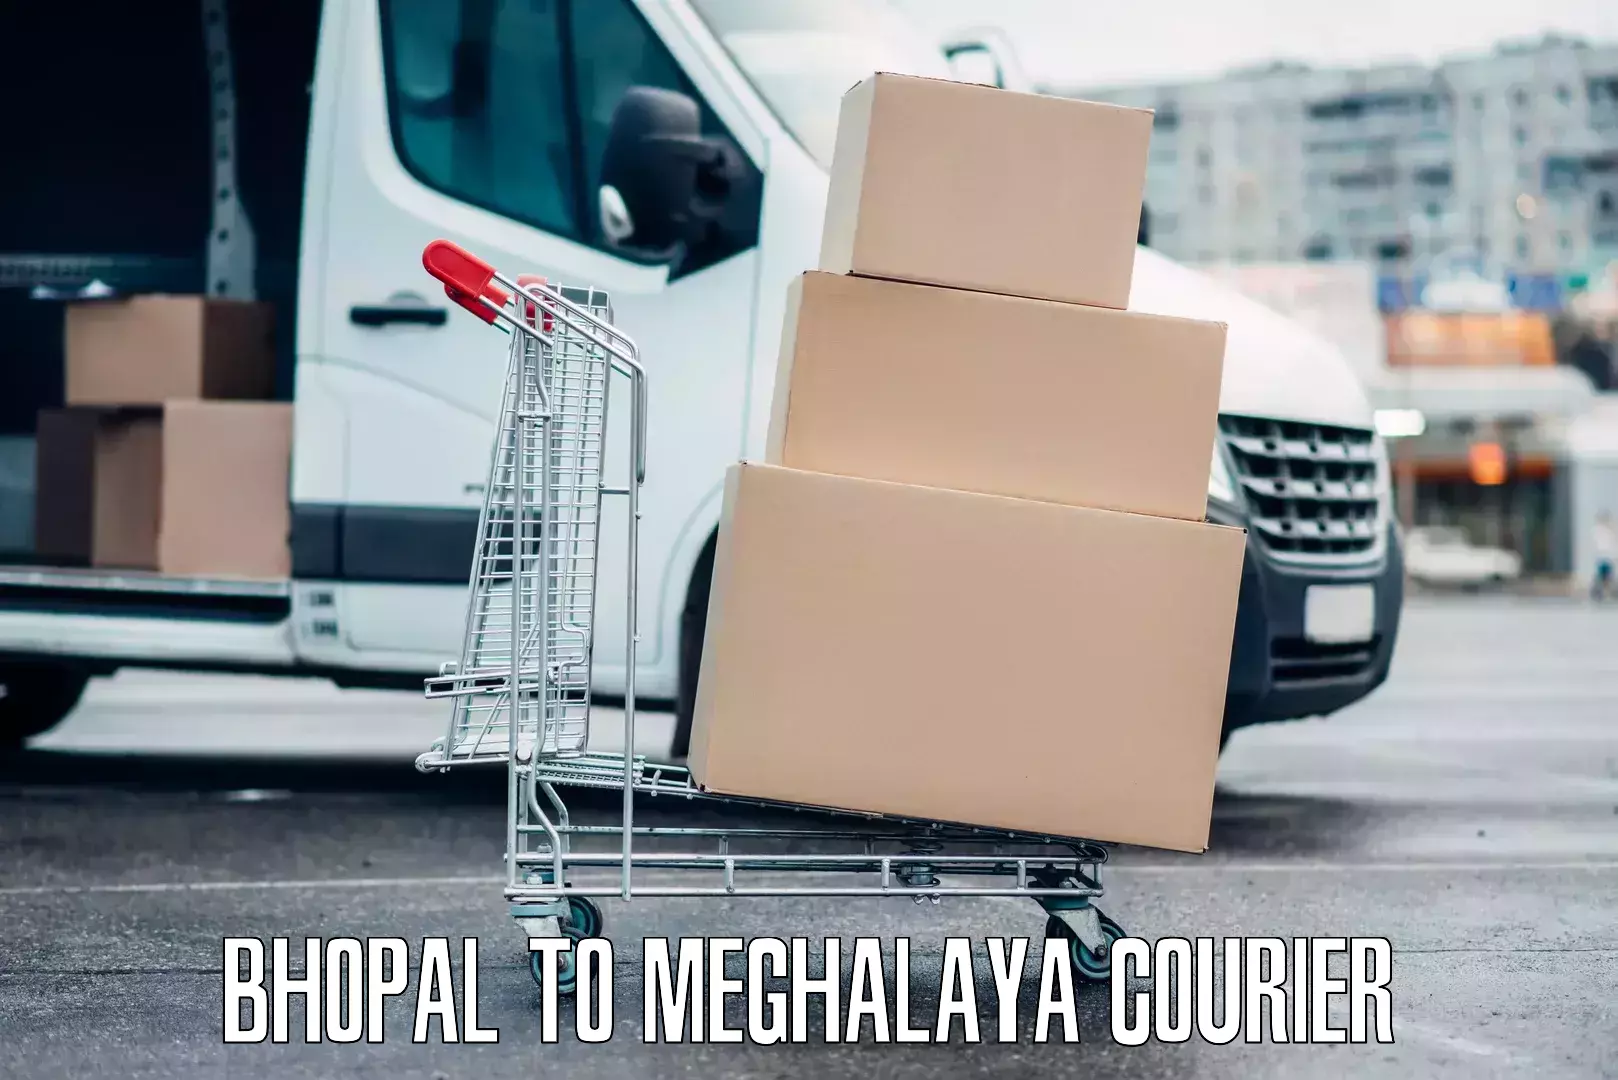 Luggage shipping specialists Bhopal to Meghalaya